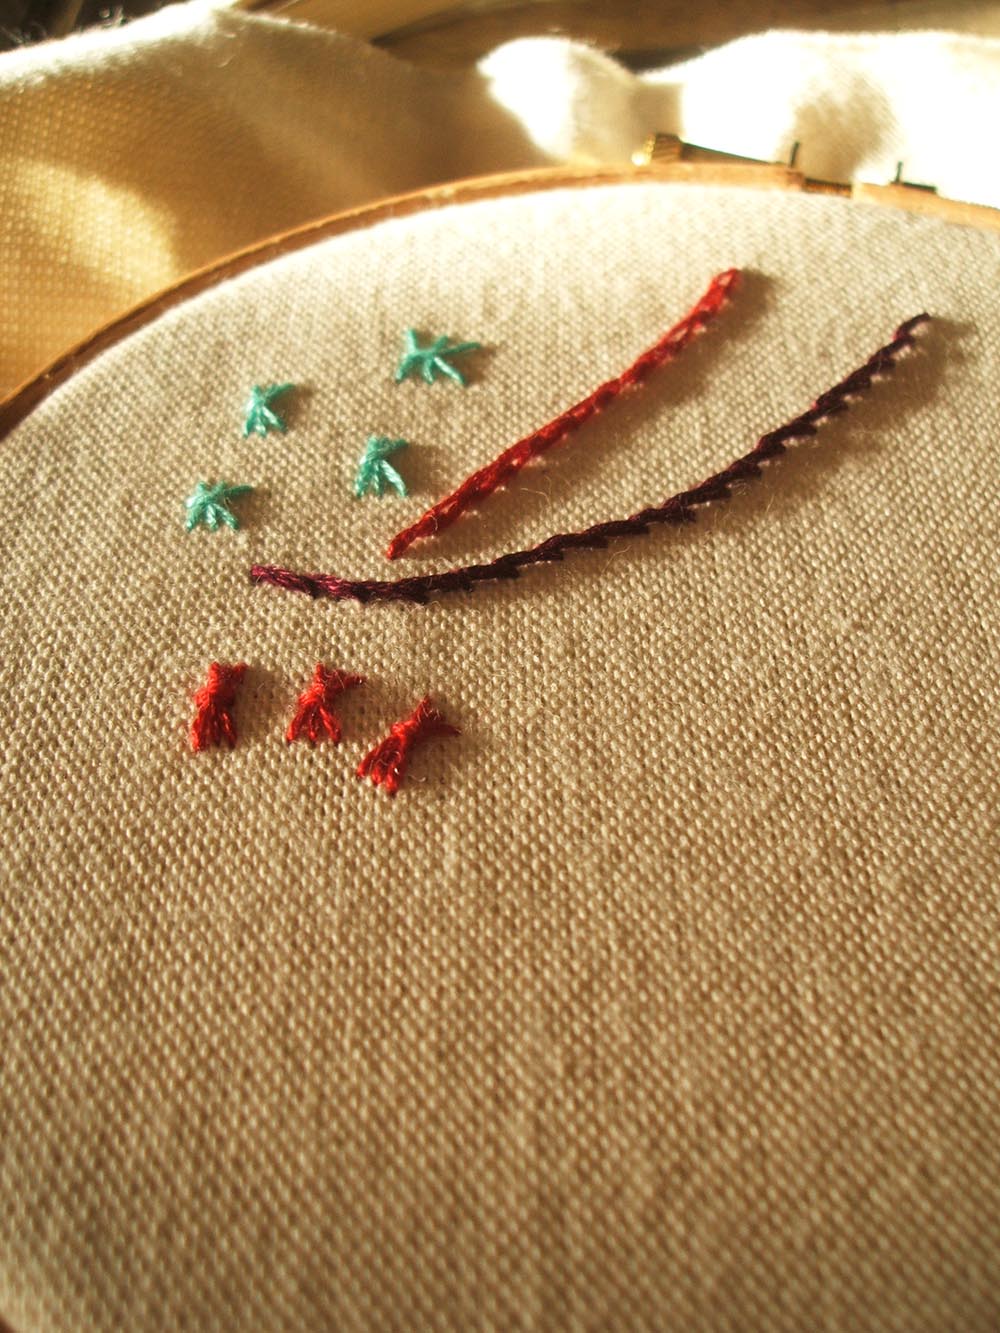 new embroidery stitches